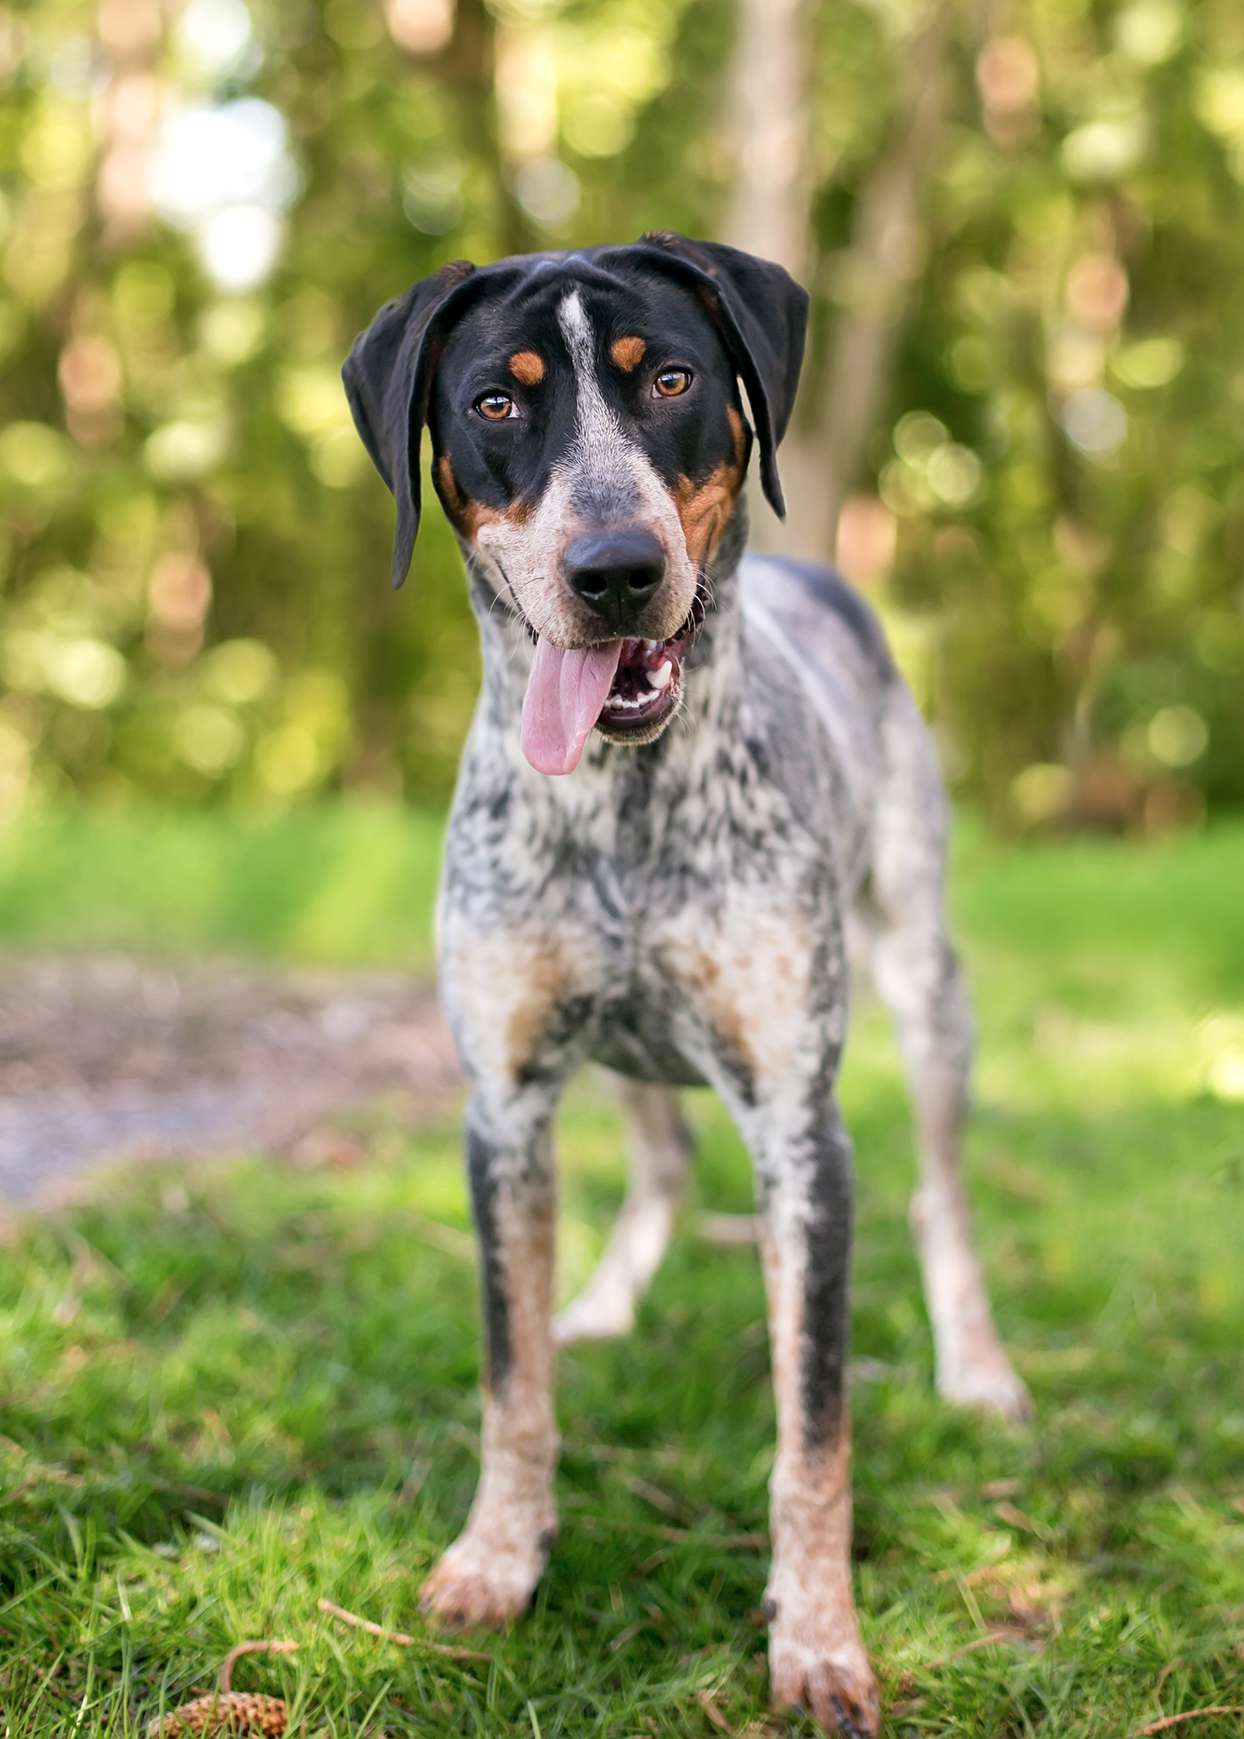 bluetick coonhound standing in grass with his tongue out